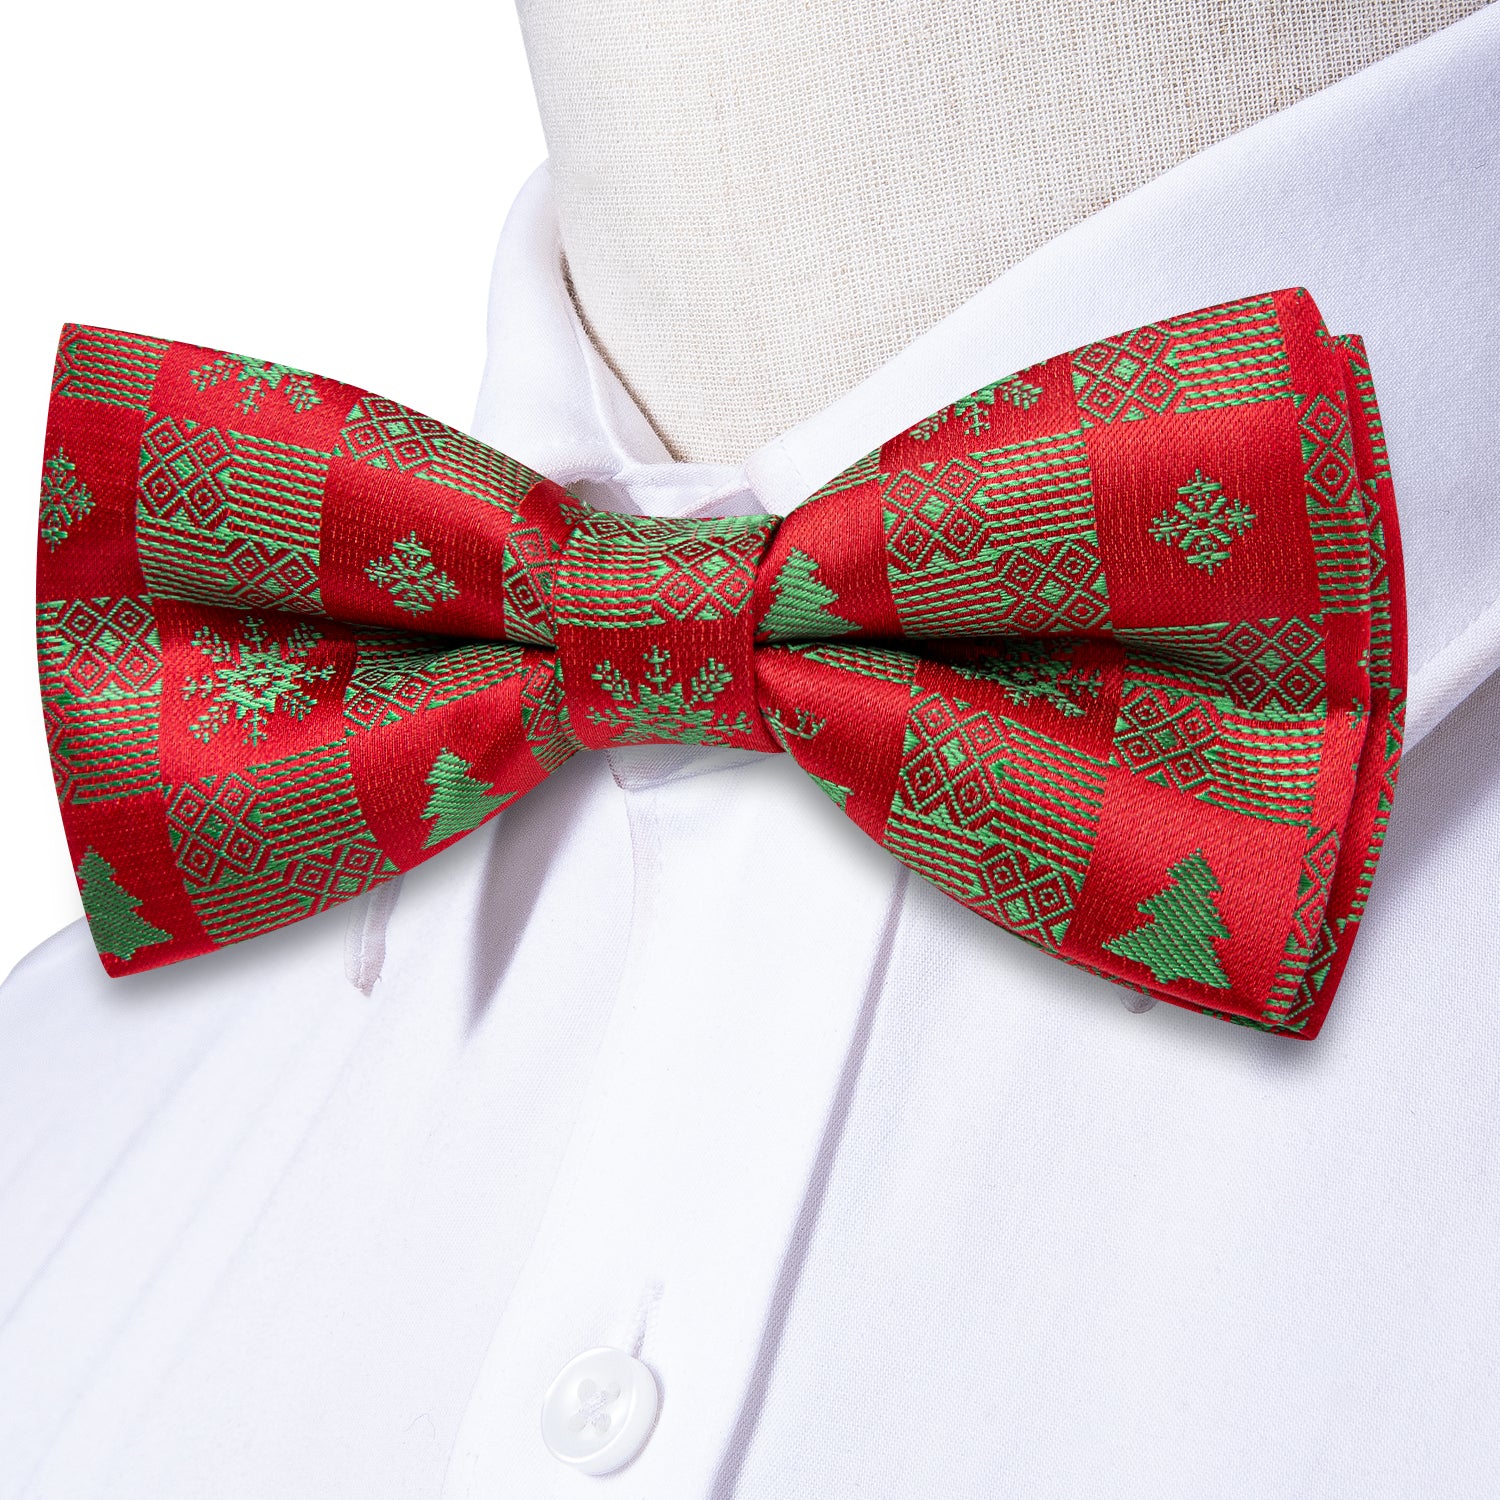 Christmas Red Green Novelty Pre-tied Bow Tie Hanky Cufflinks Set